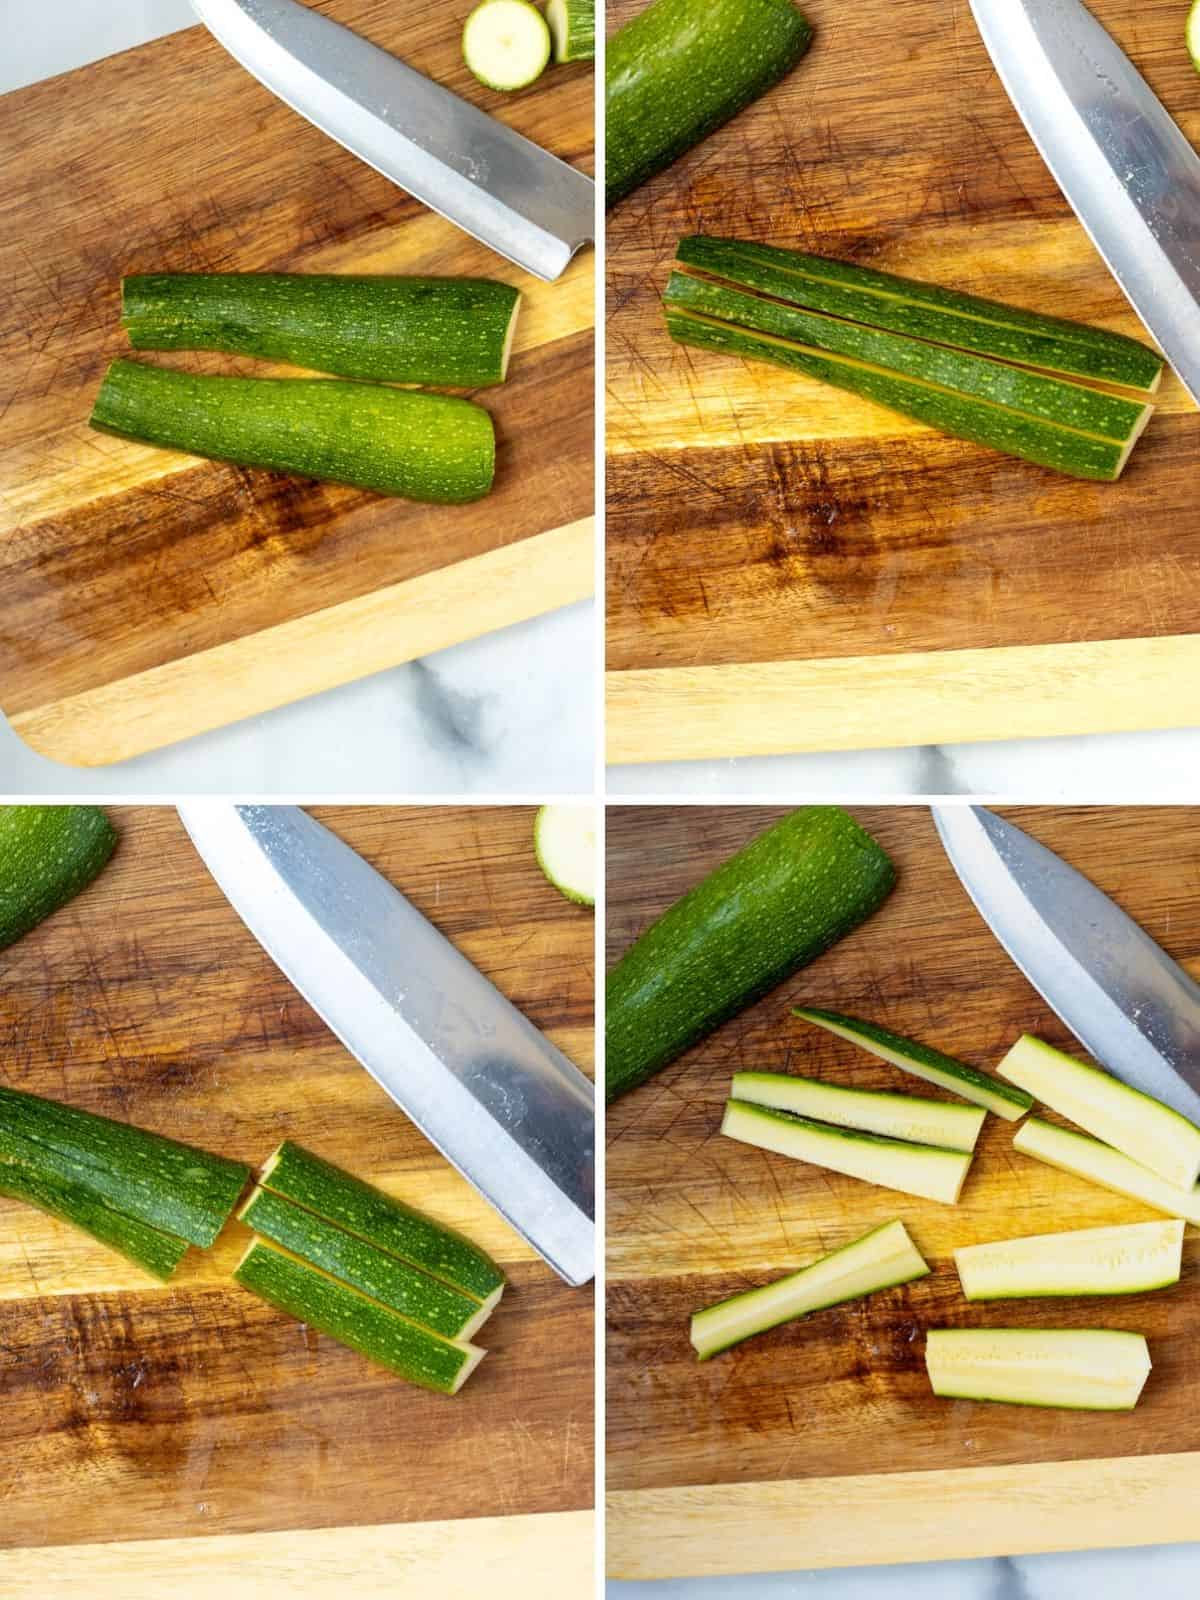 Step by step photos showing how to cut a zucchini into fries. 